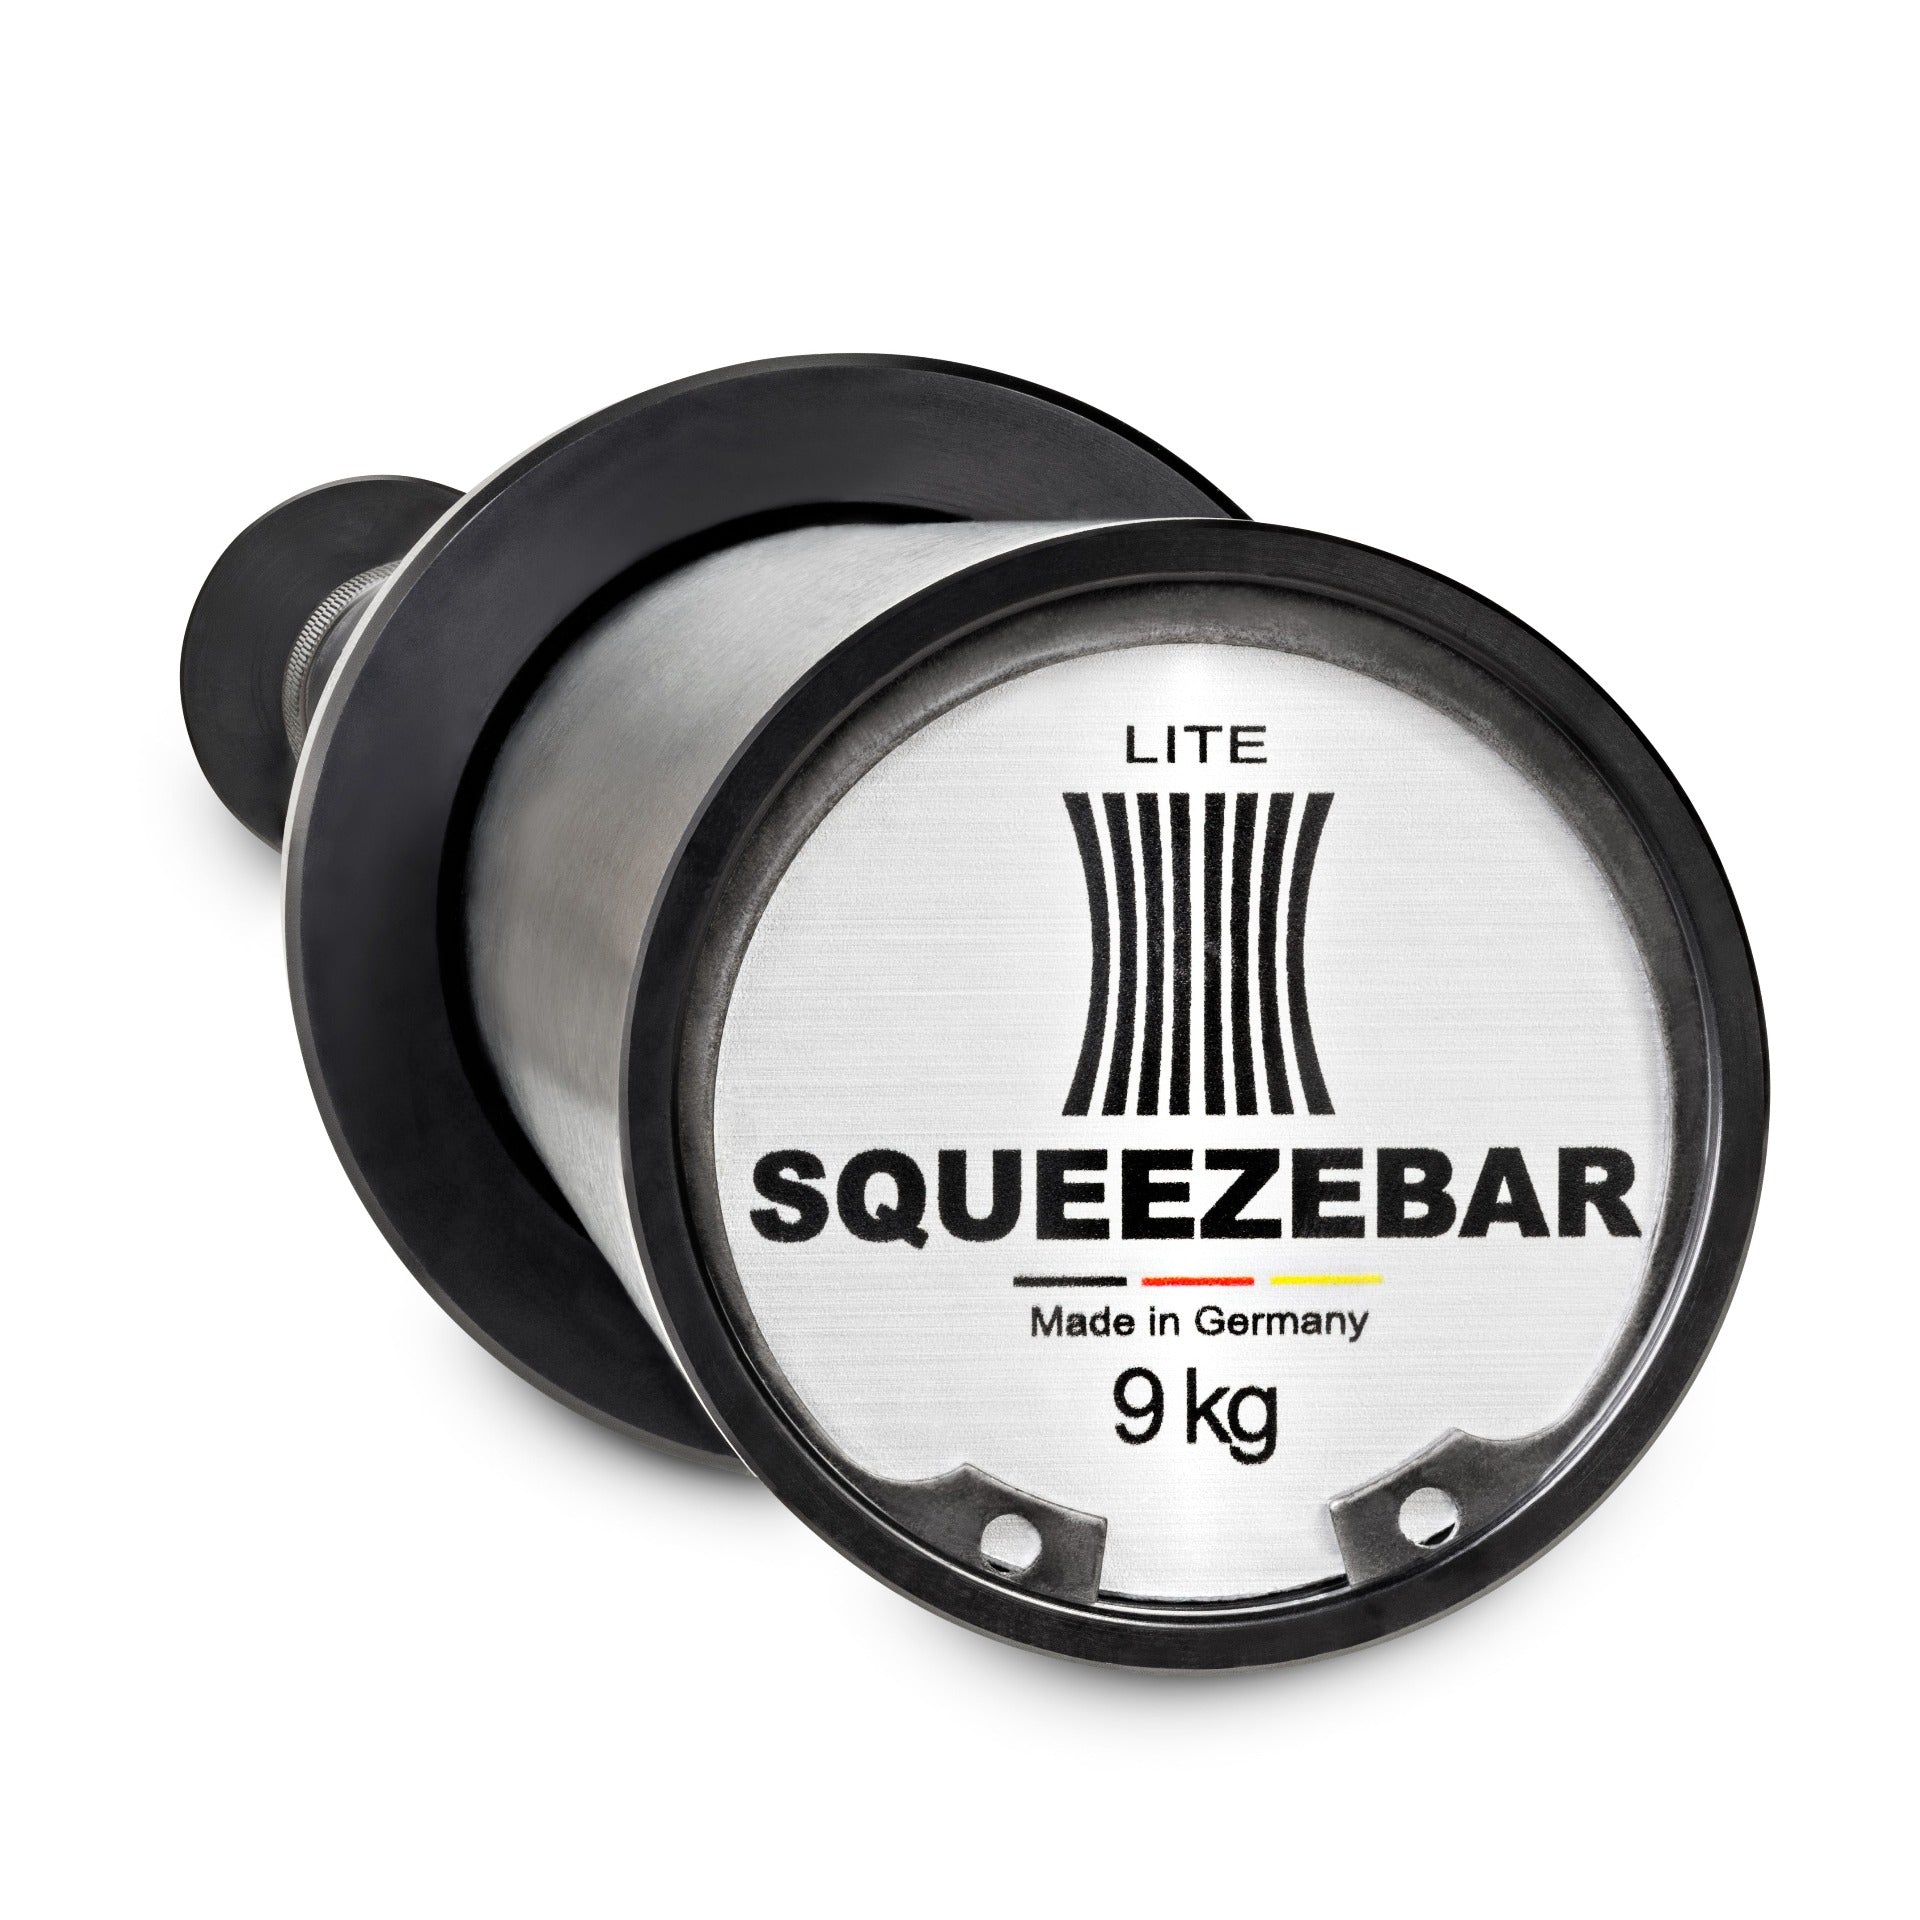 Close up of Barbell edge with lettering reading Squeezebar, Made in Germany, and 9kg referring to the barbell weight